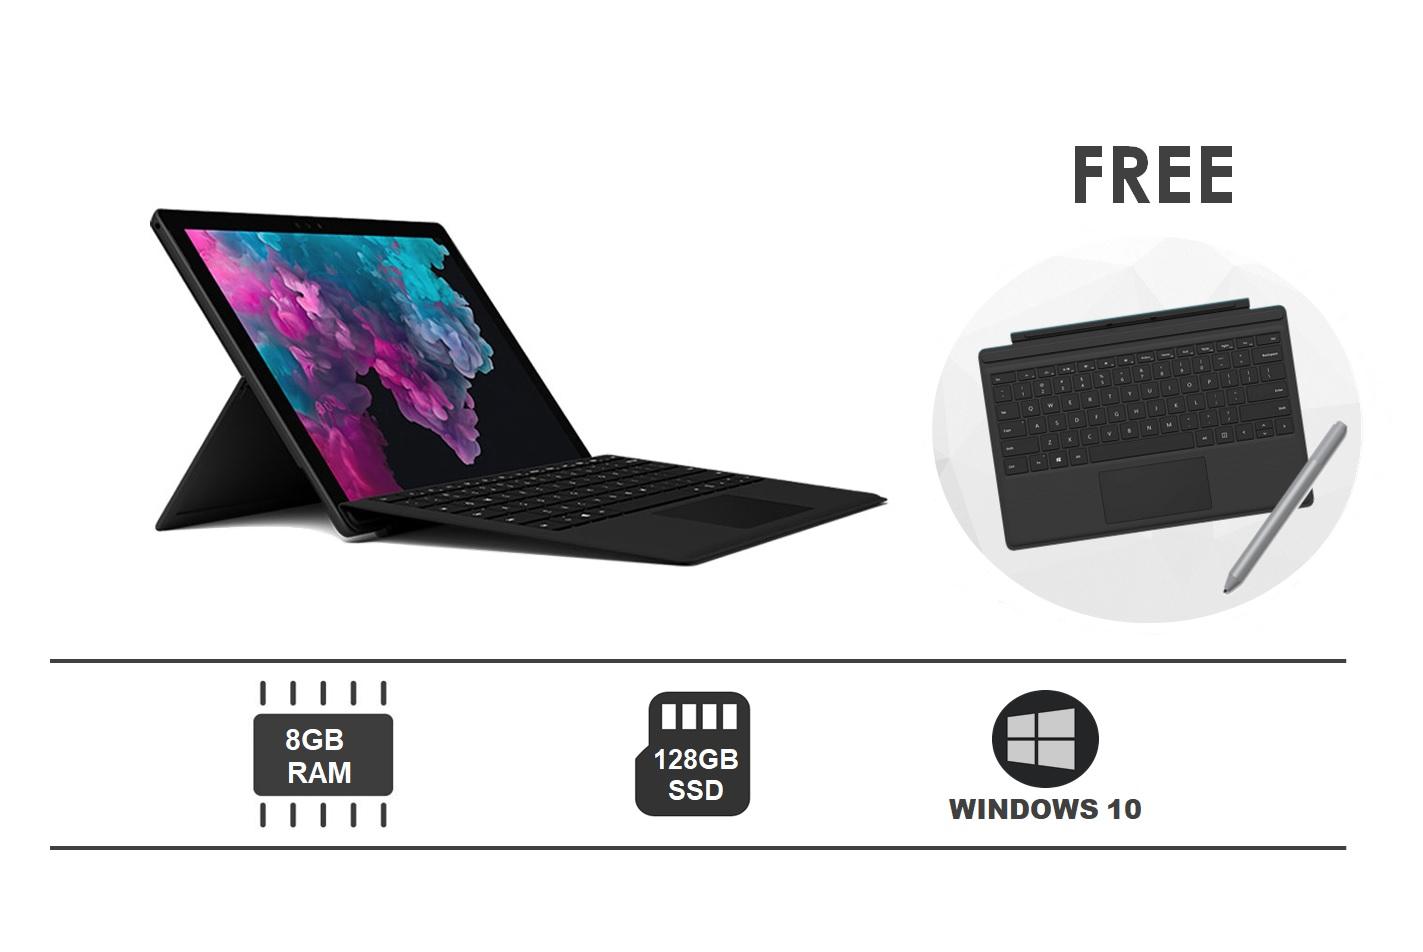 Microsoft Surface Pro 6 (i5, 128GB, 8GB) with Type Cover and Pen